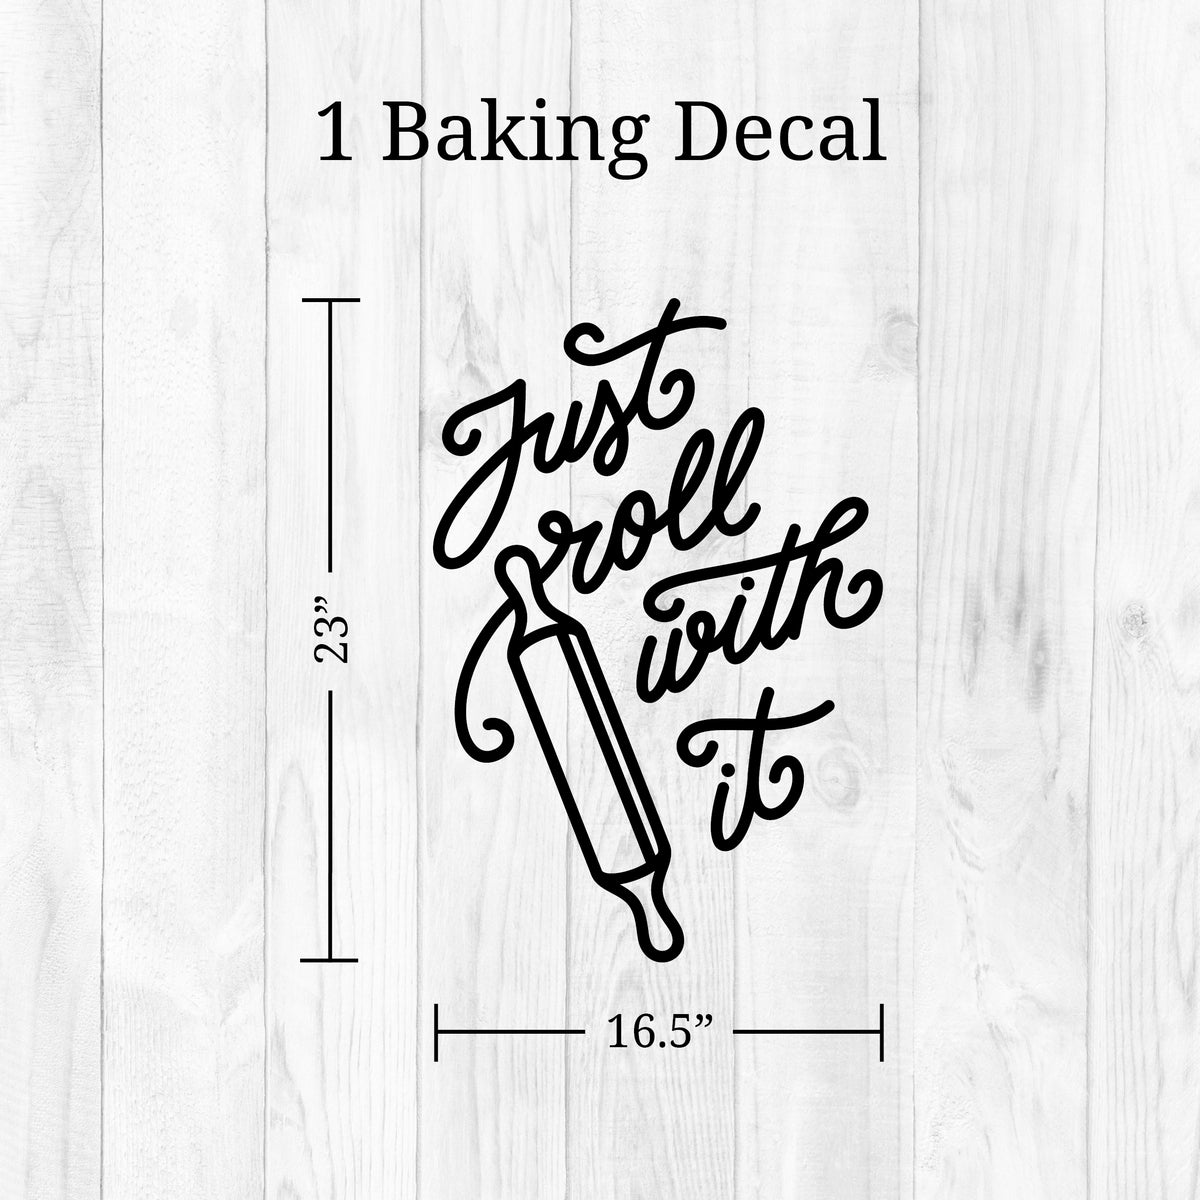 Pantry | Kitchen Wall Decal